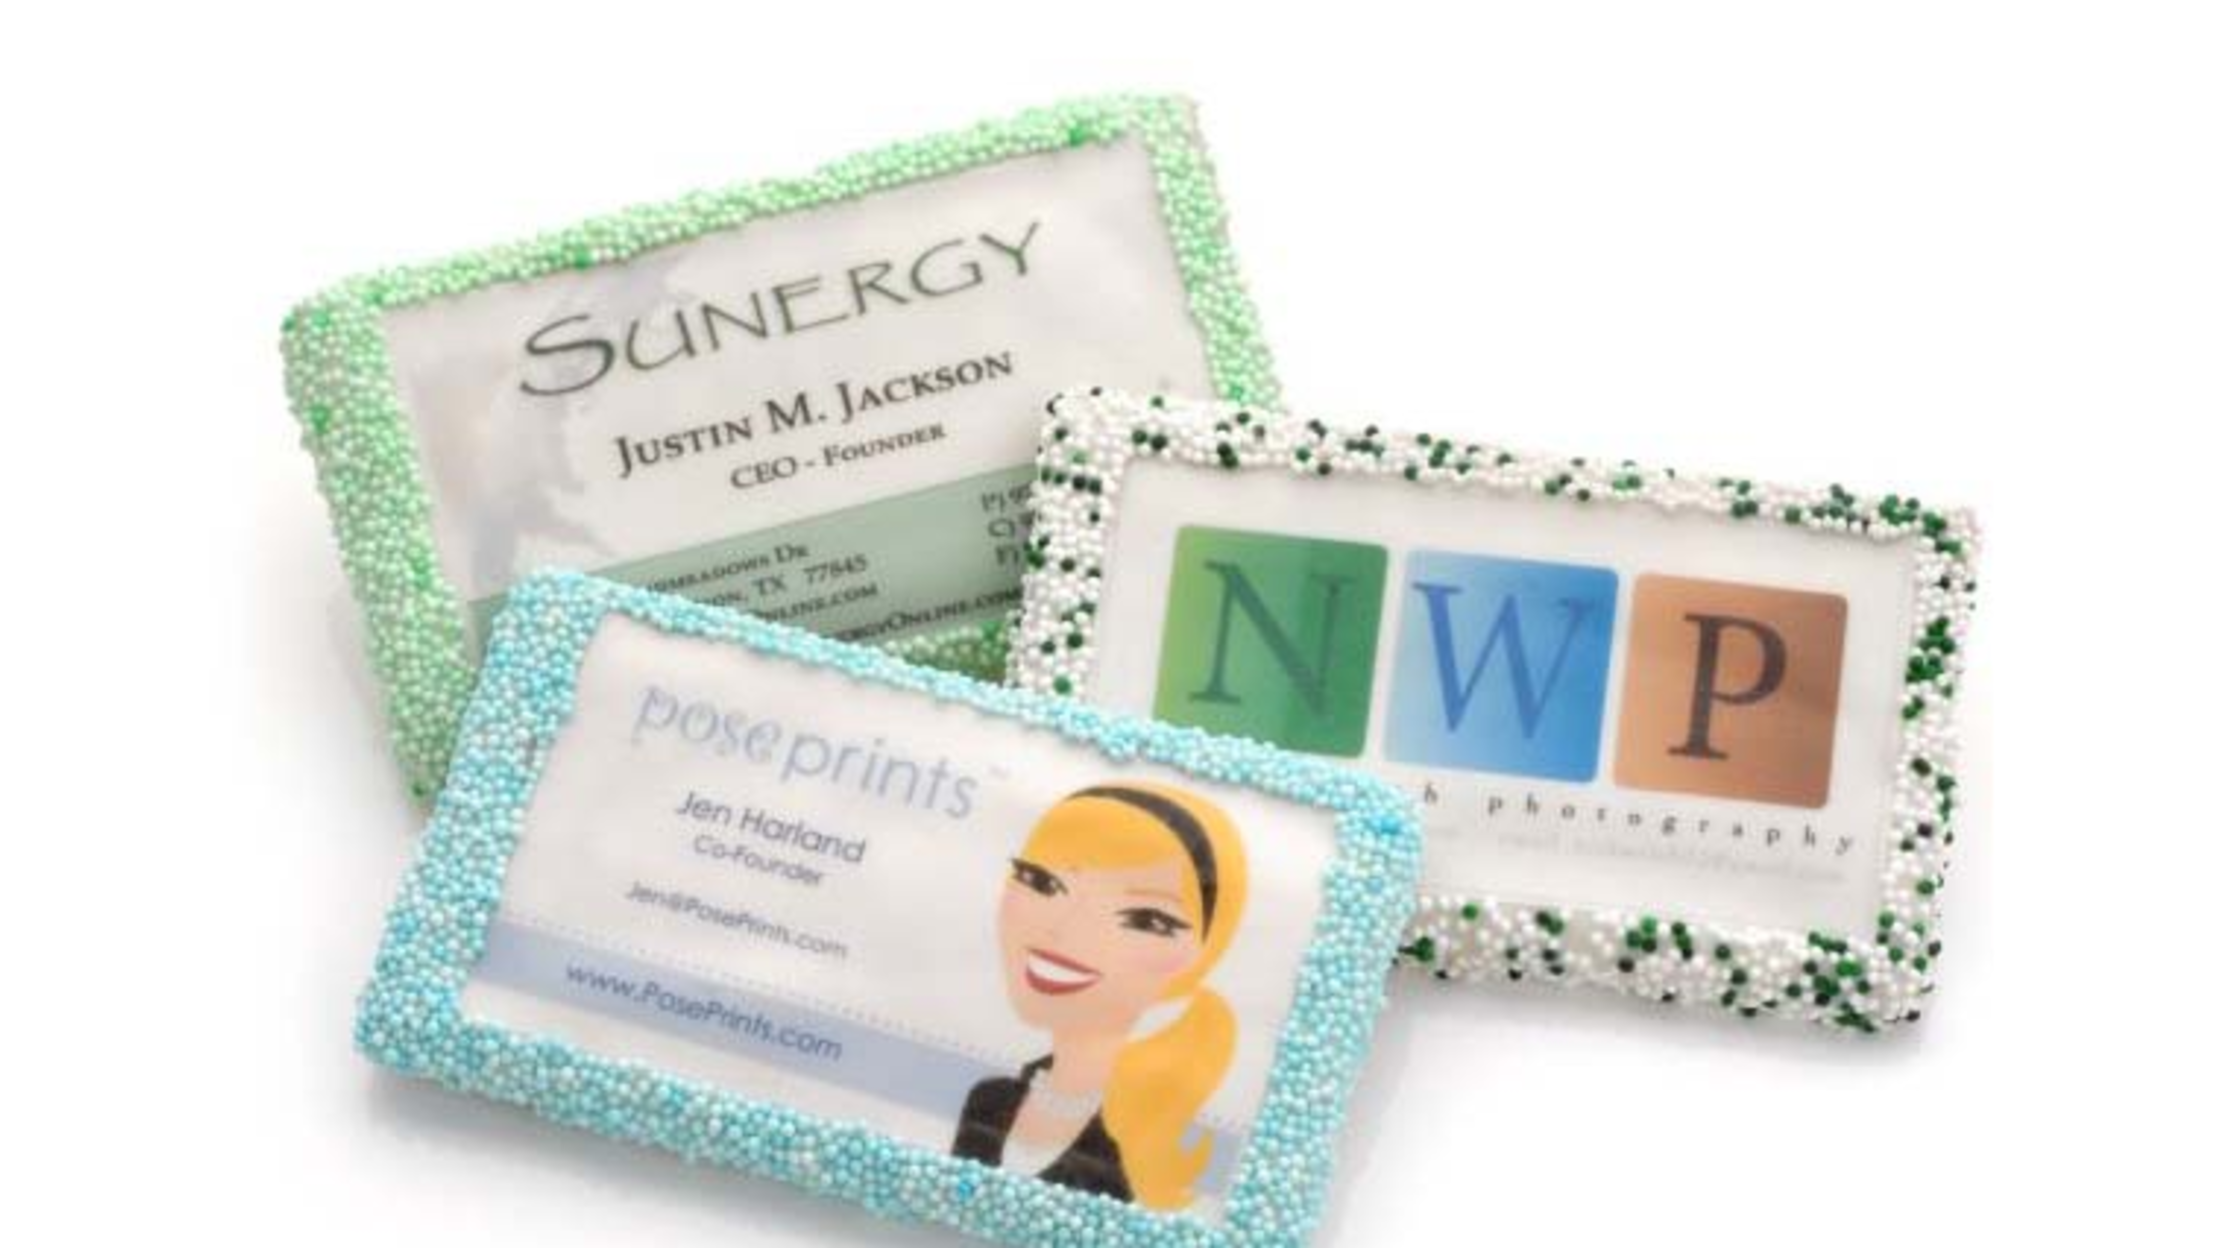 example of edible business cards